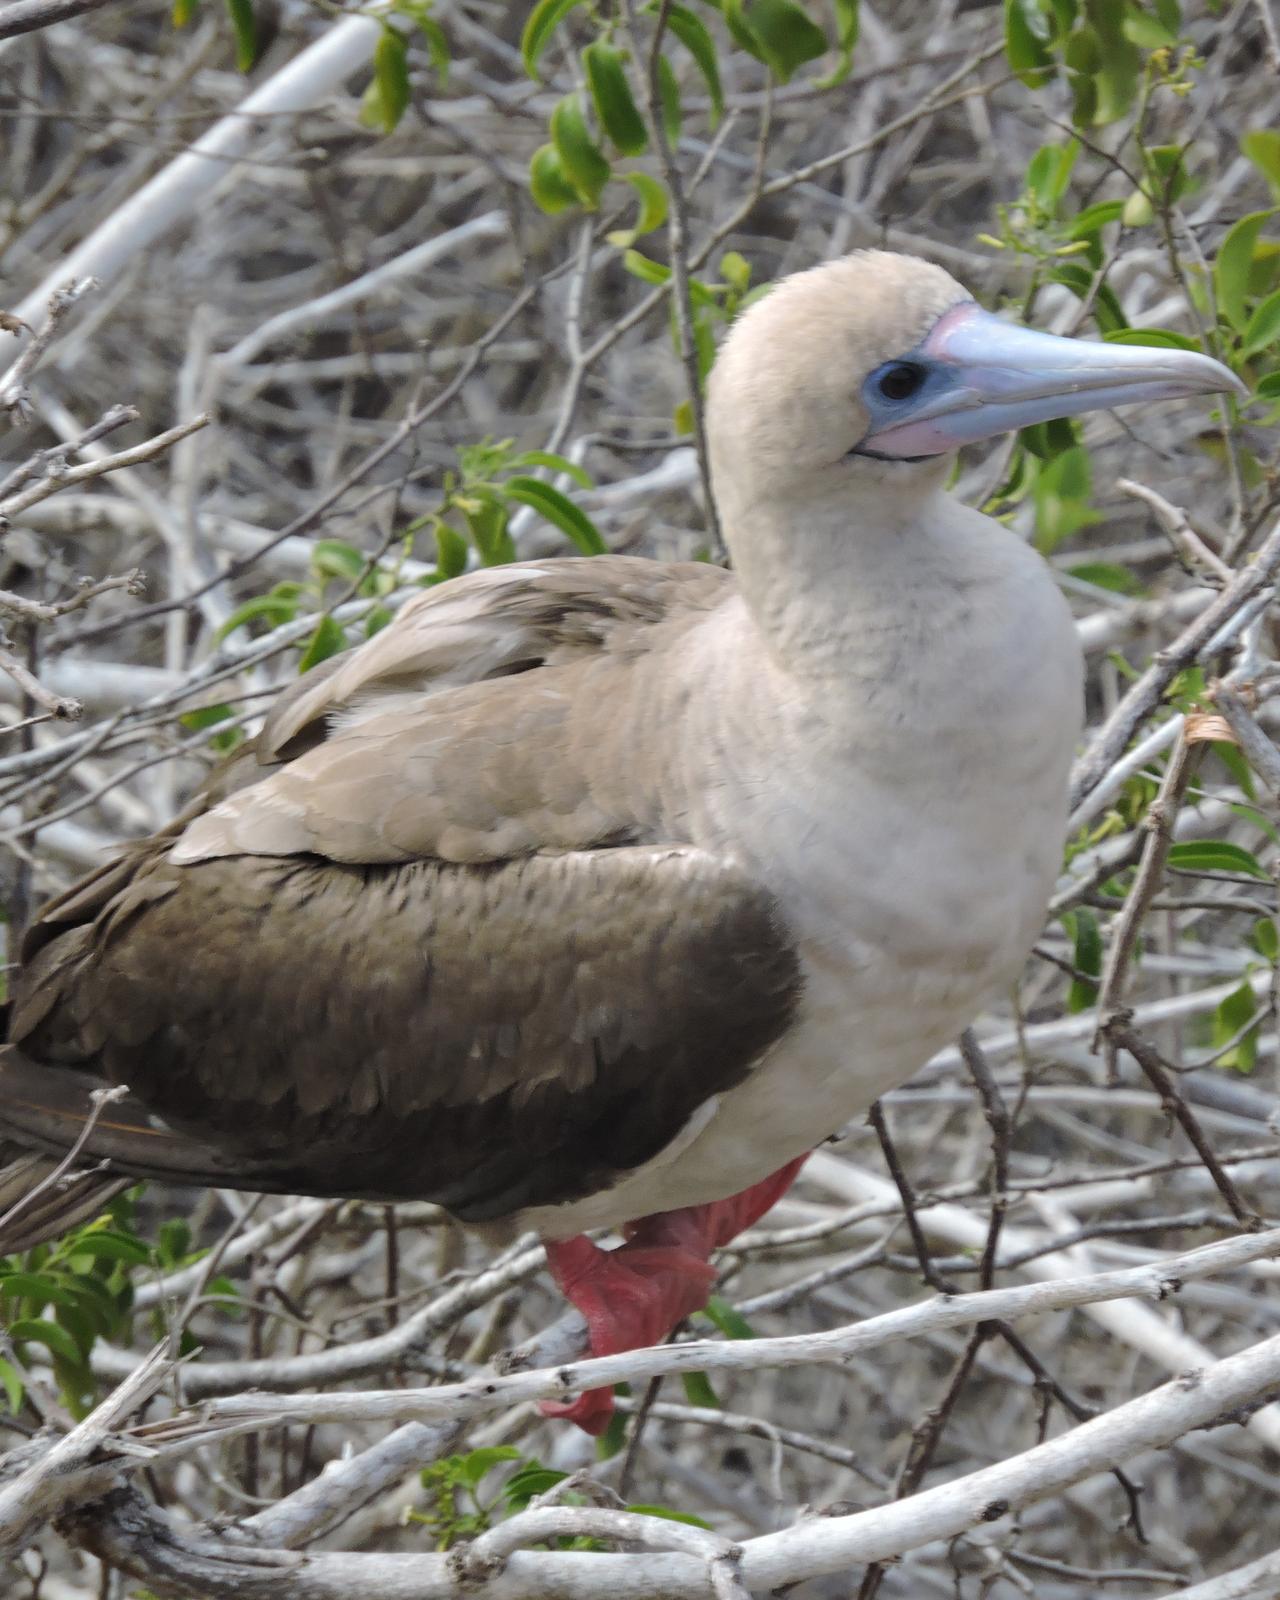 Red-footed Booby Photo by Peter Lowe